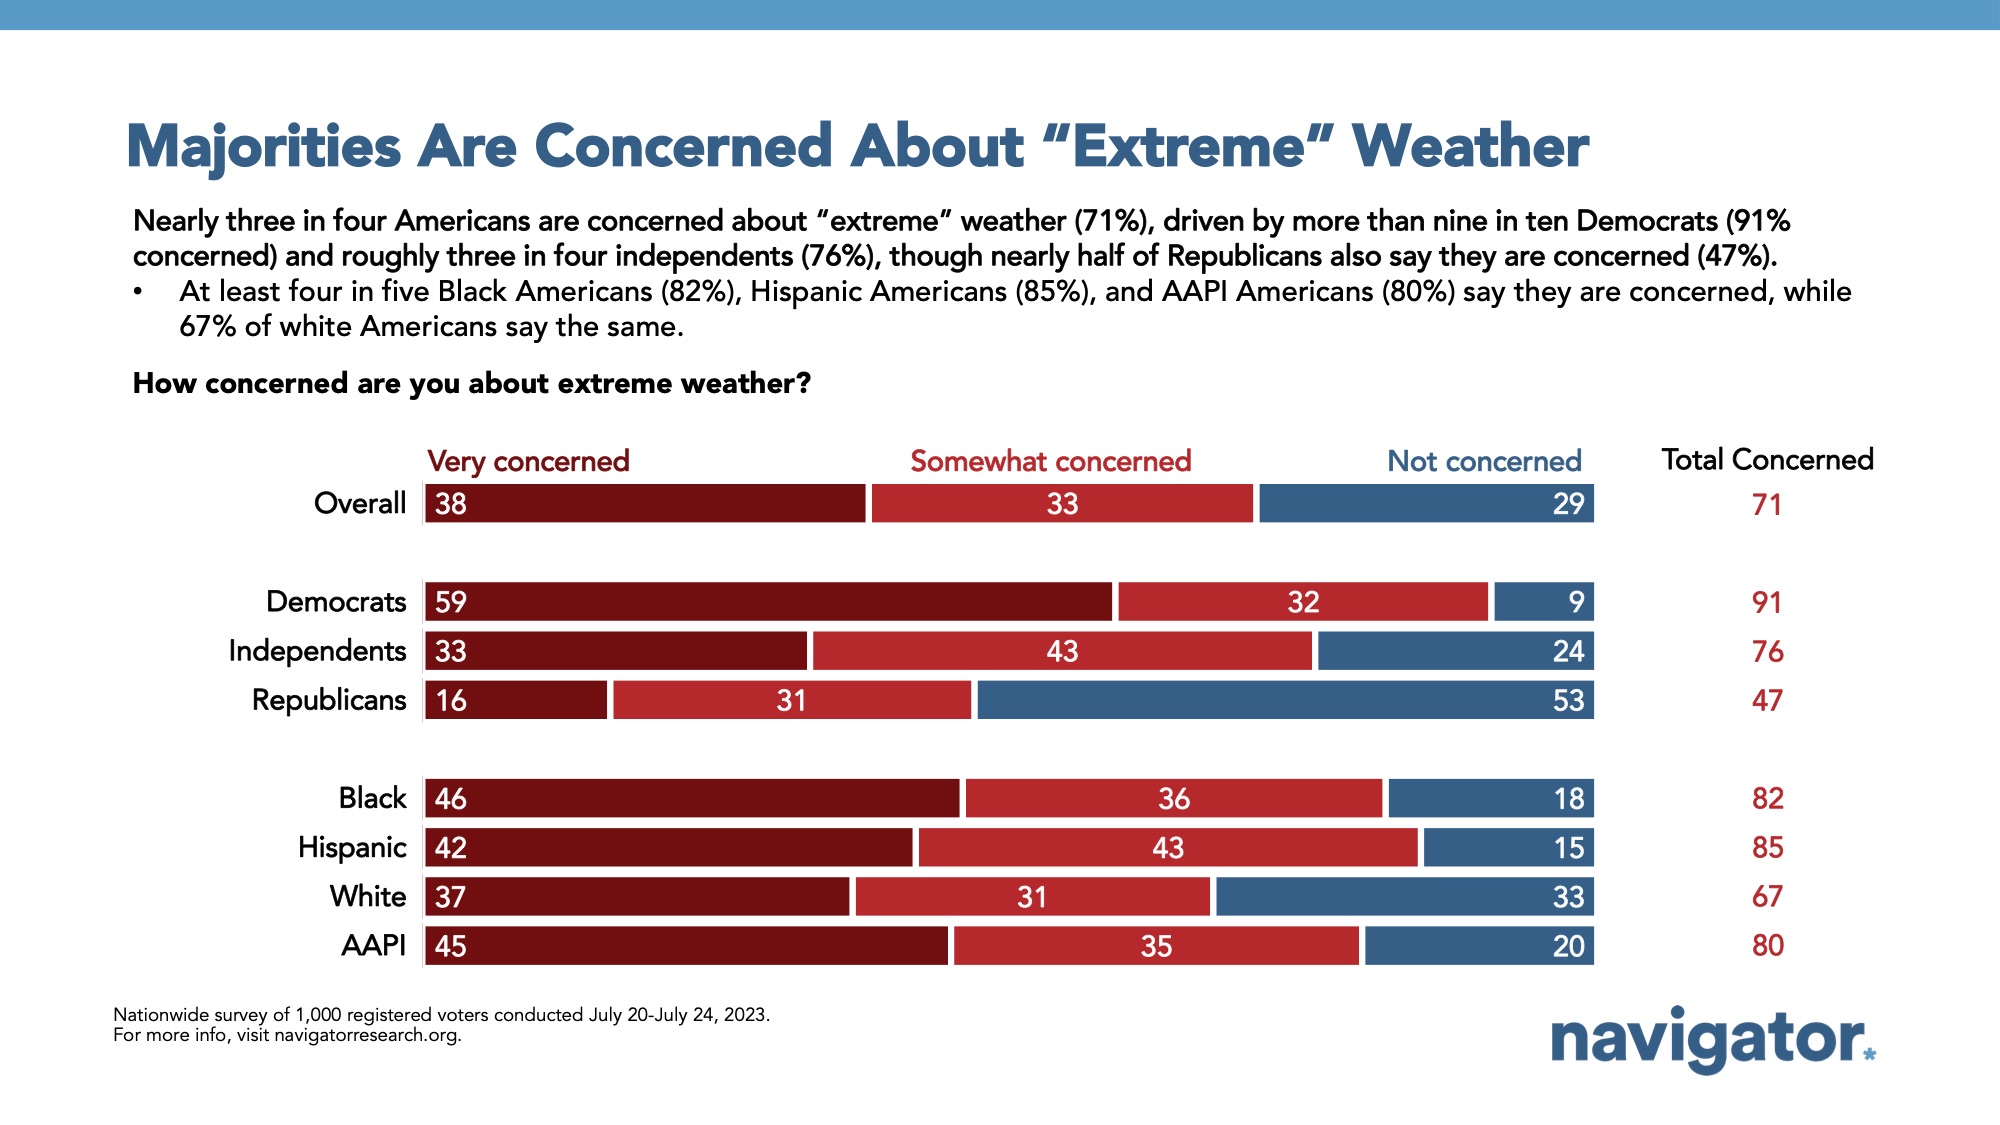 Survey results to the following prompt: How concerned are you about extreme weather?